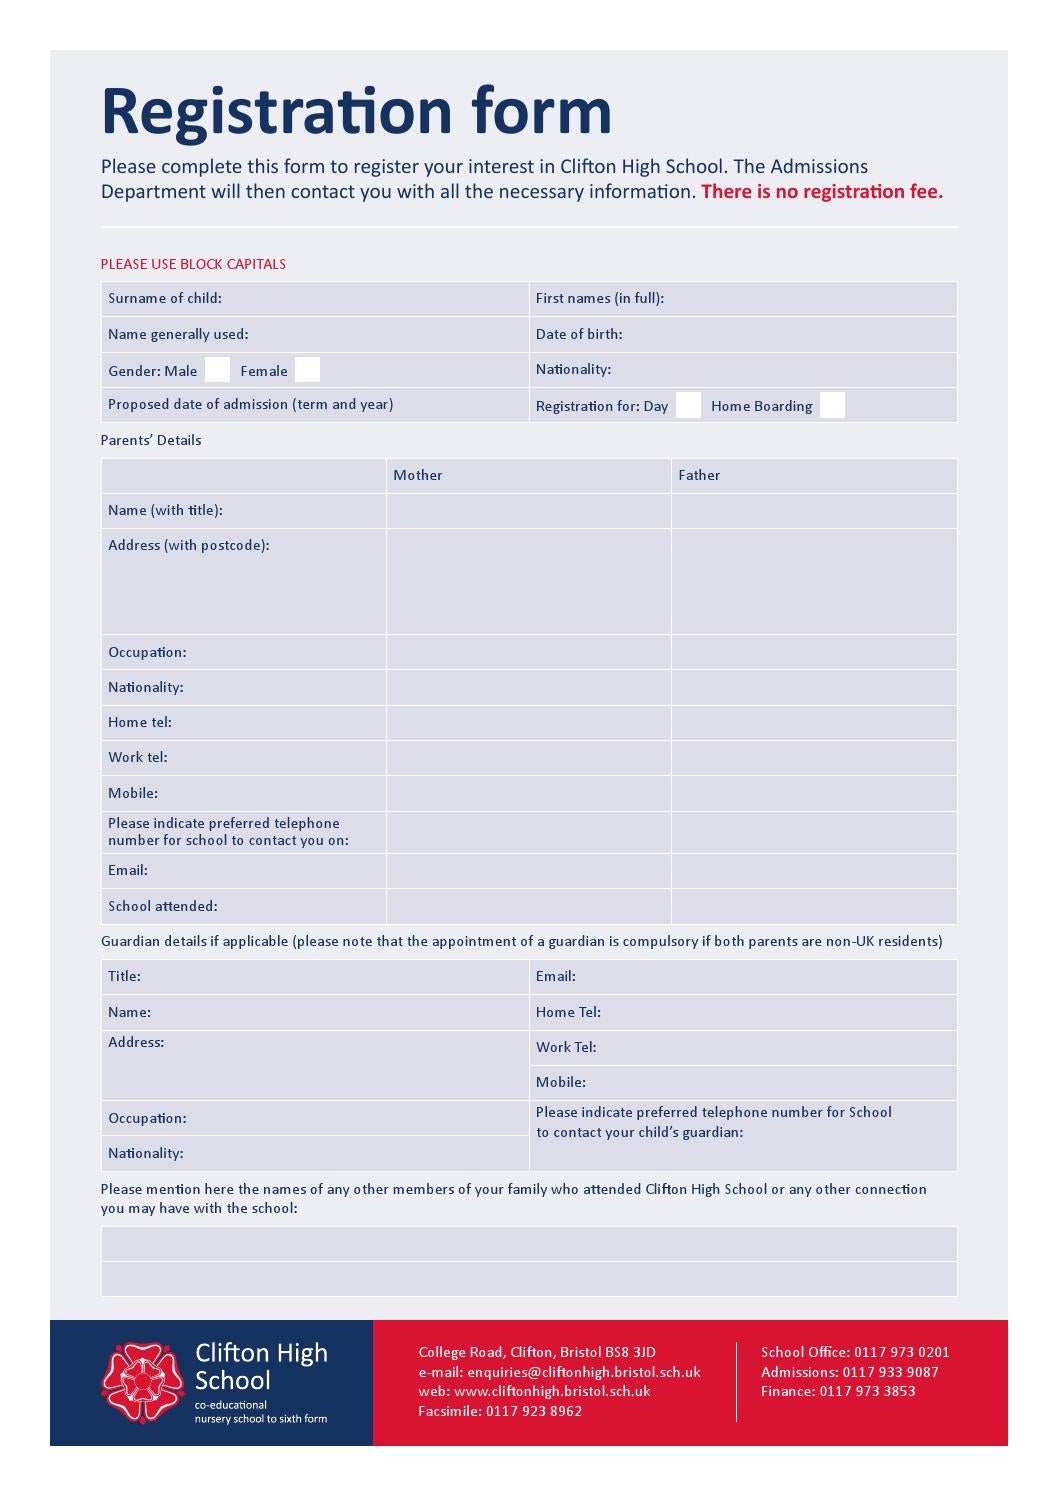 applicable lodgement fee of company registration